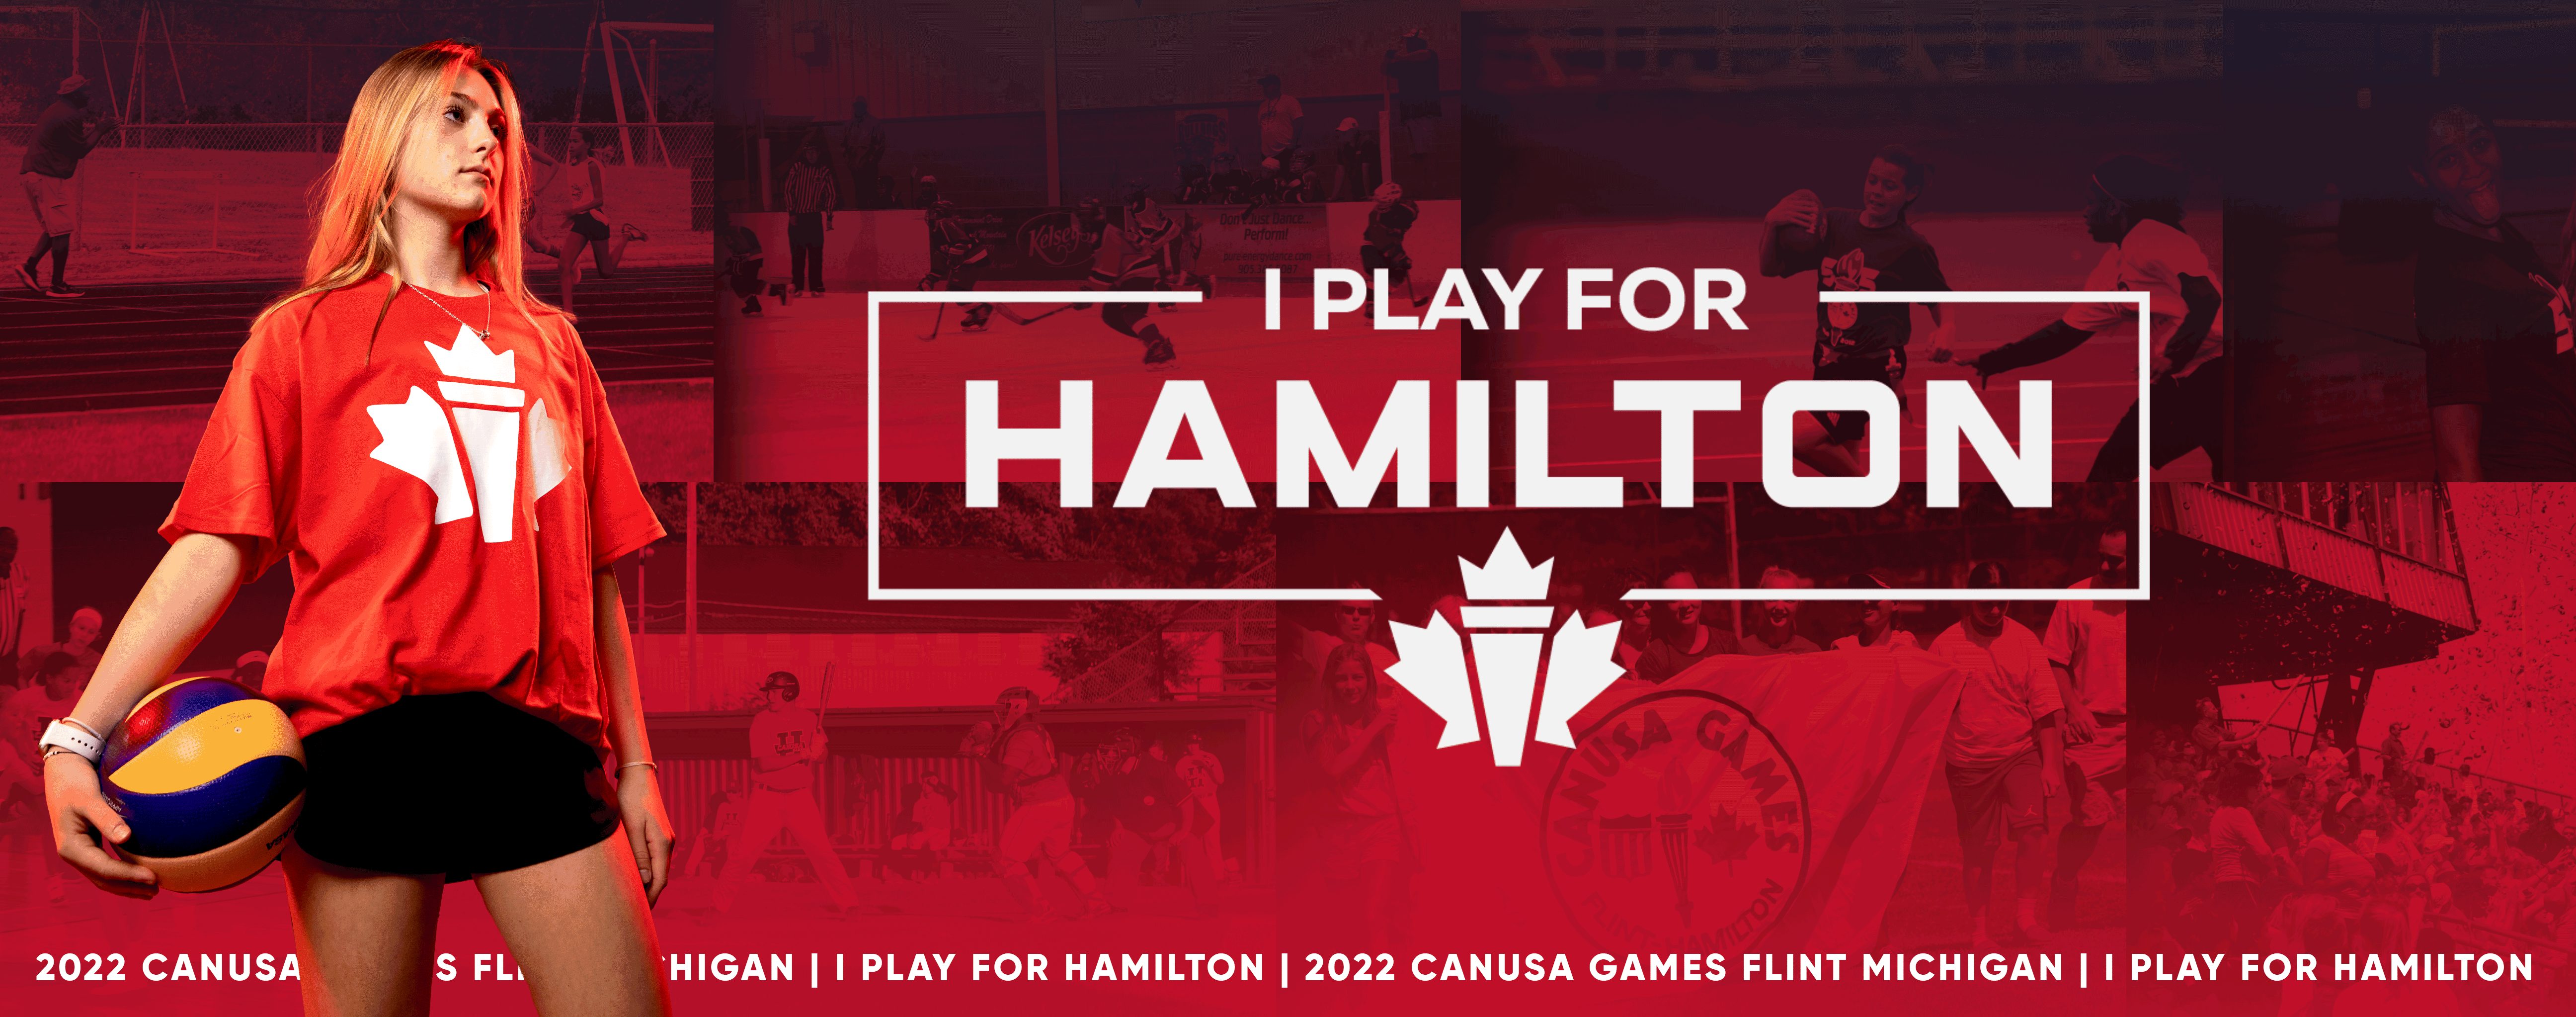 2022 CANUSA Games in Flint Michigan "I PLAY FOR HAMILTON" Sign up to be a part of the games!